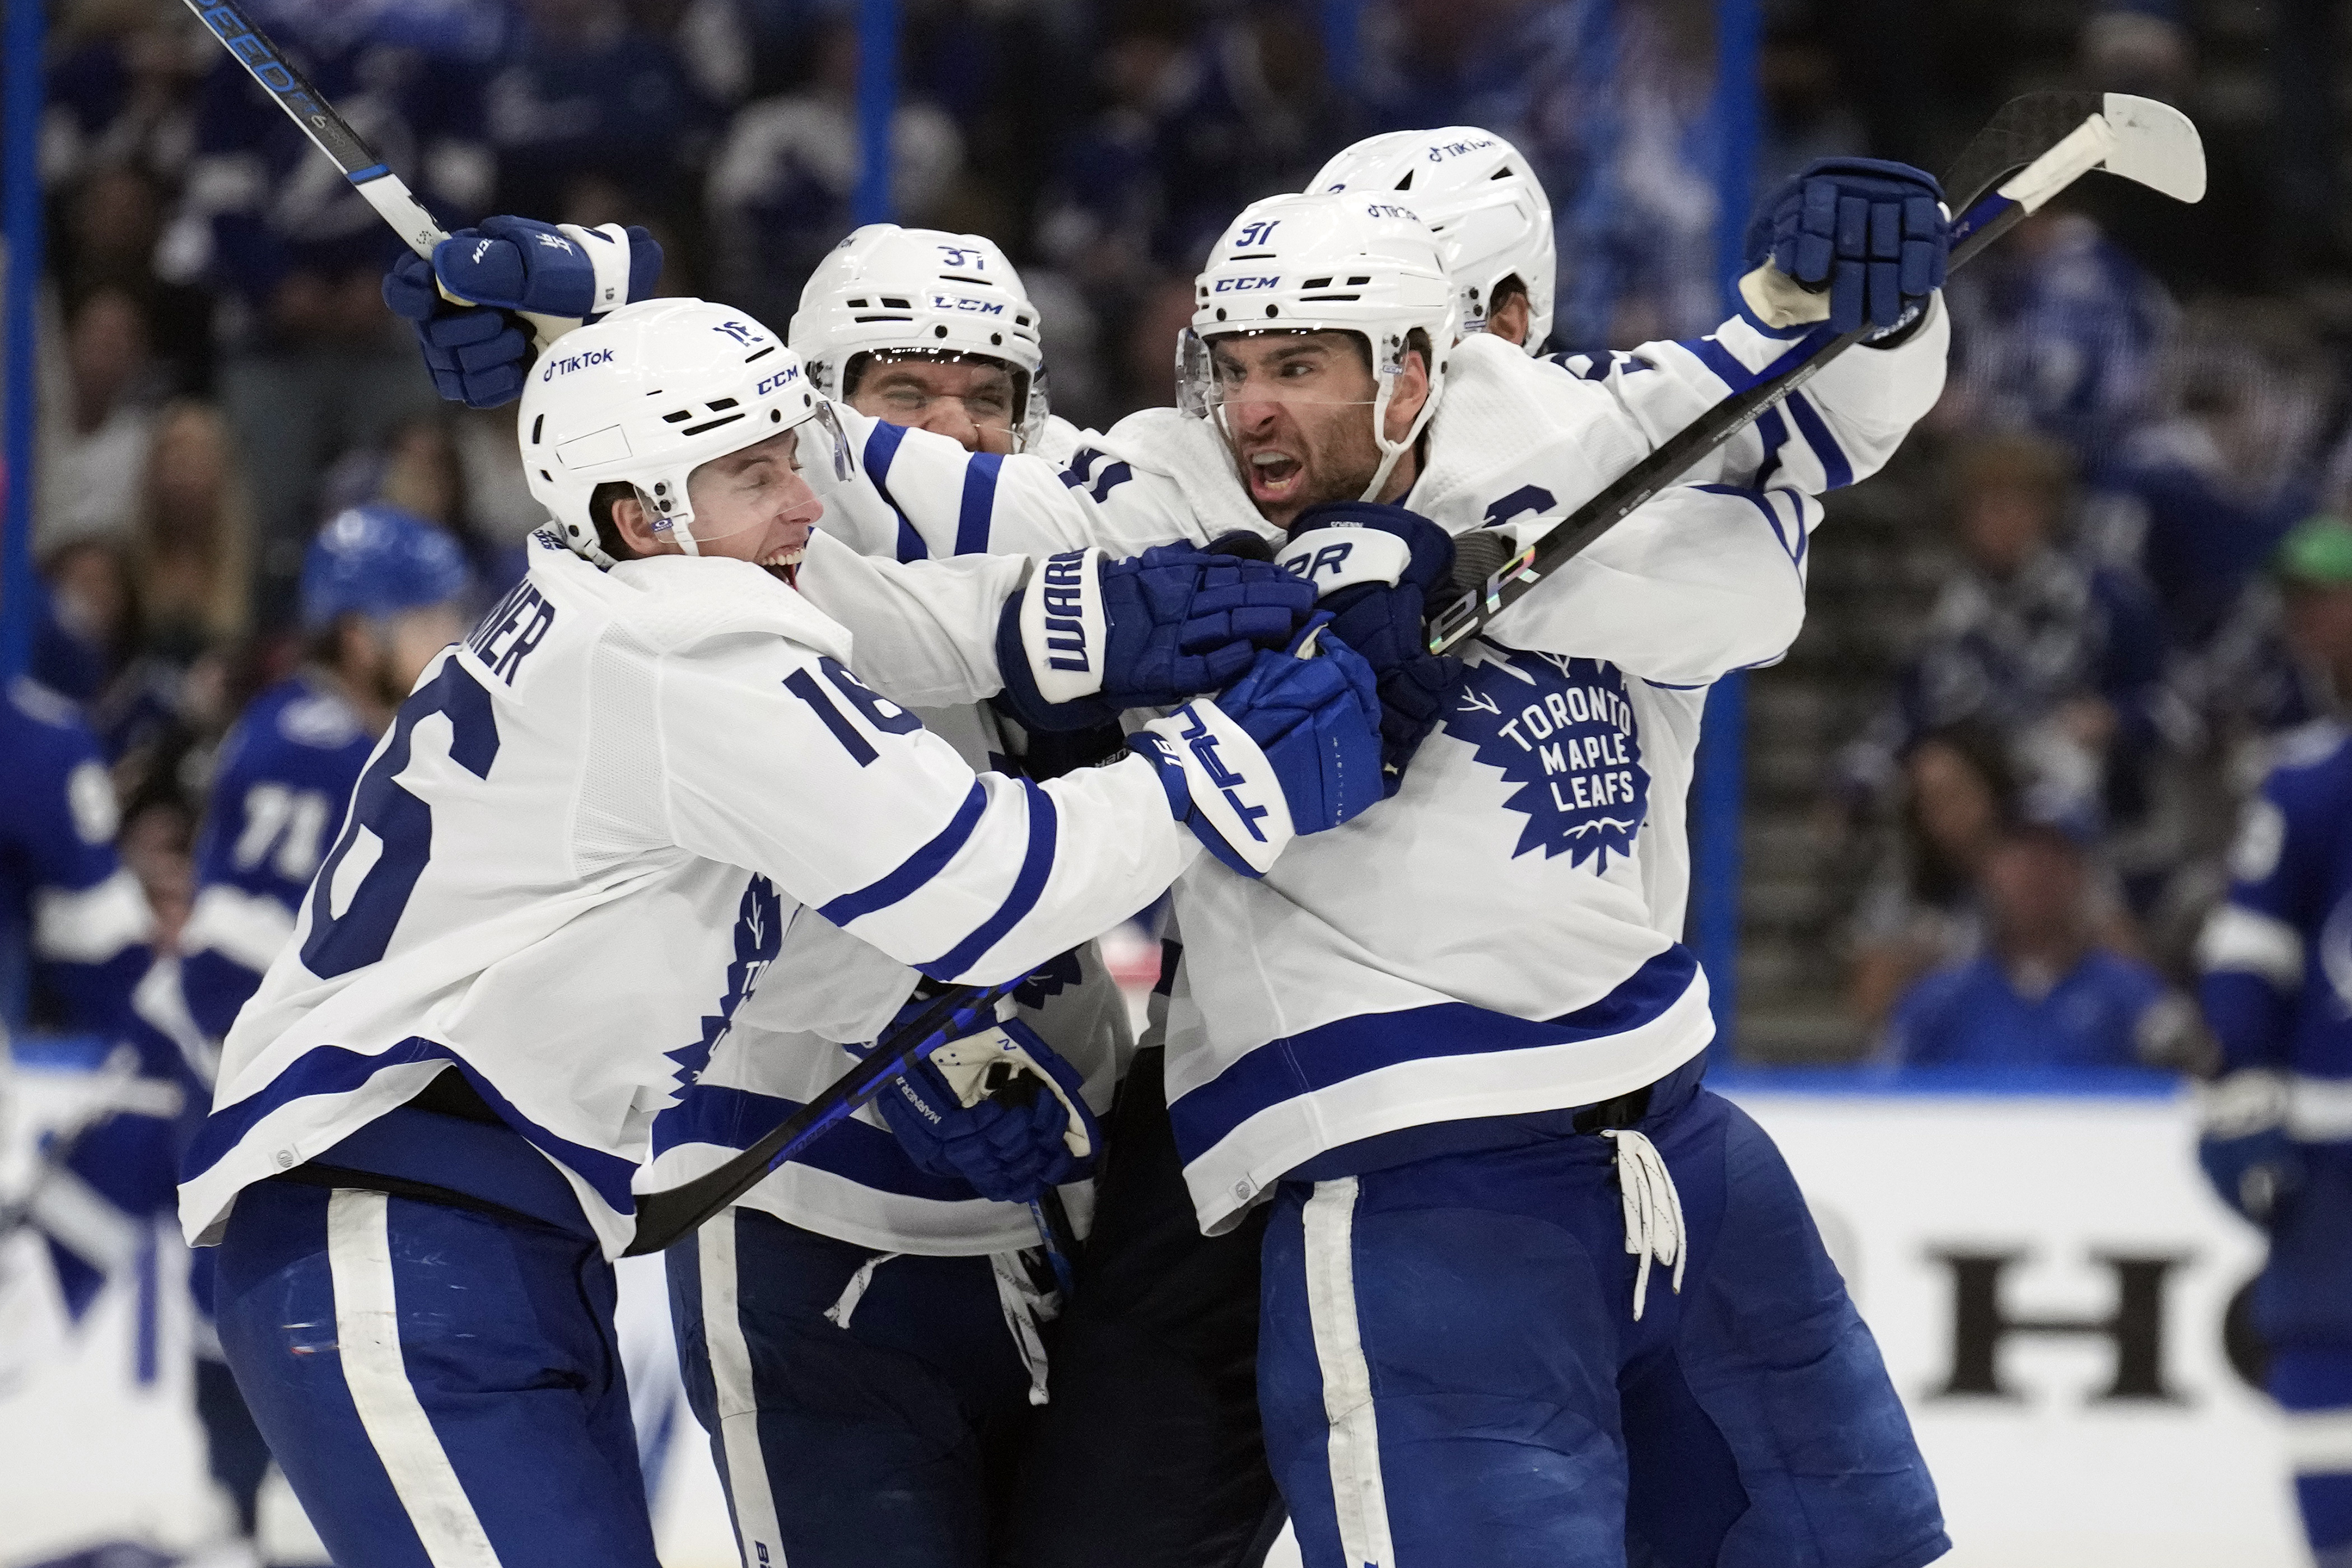 Toronto Maple Leafs defeat Tampa Bay Lightning 2-1 in overtime to advance in NHL playoffs